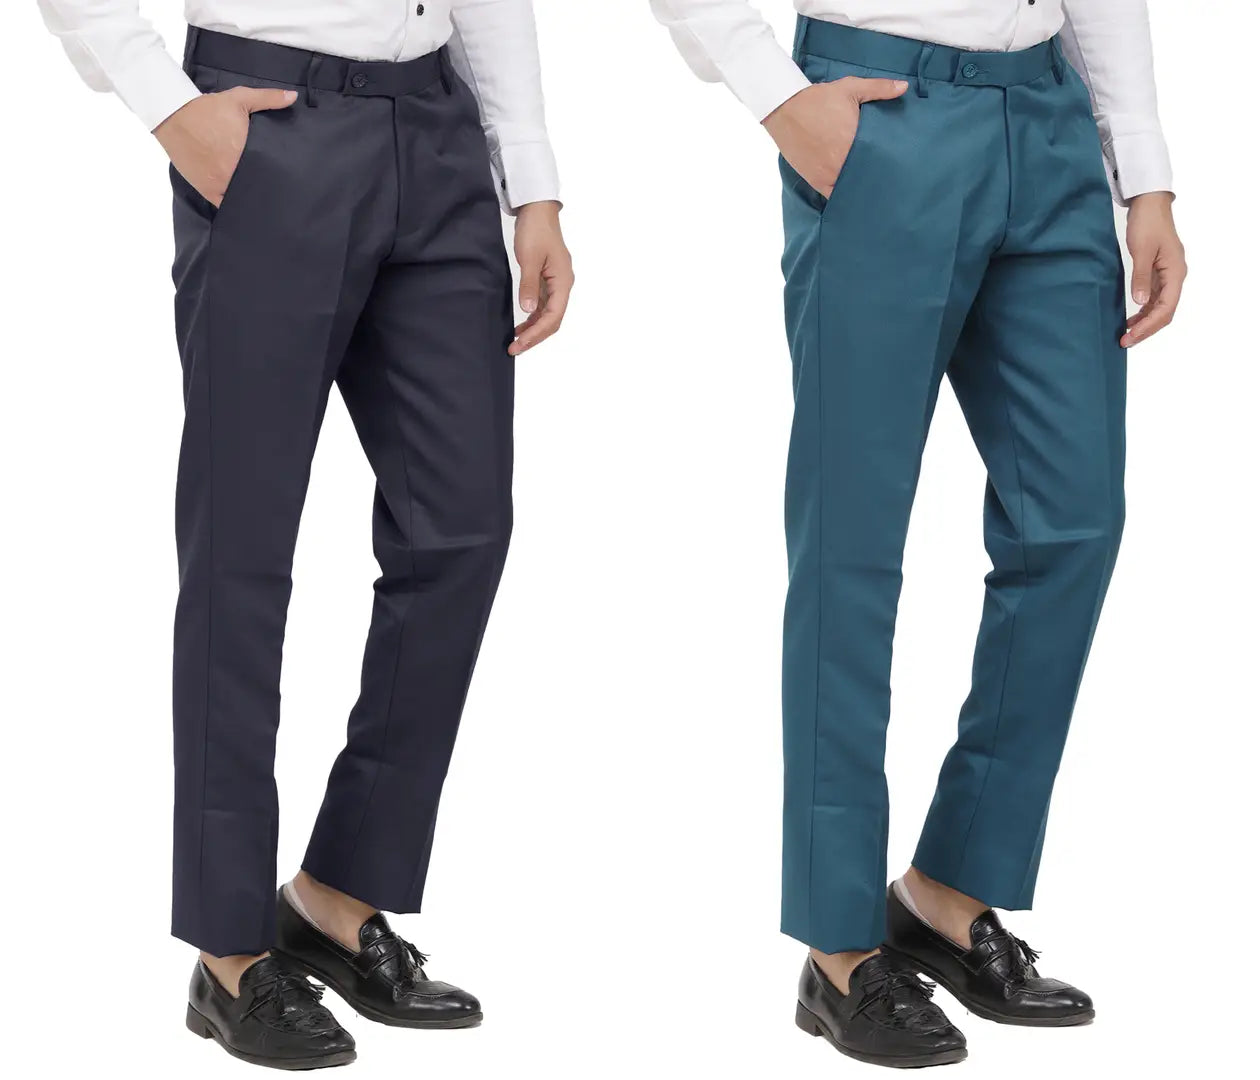 Kundan Men Poly-Viscose Blended Dark Grey and Morpich Blue Formal Trousers ( Pack of 2 Trousers )